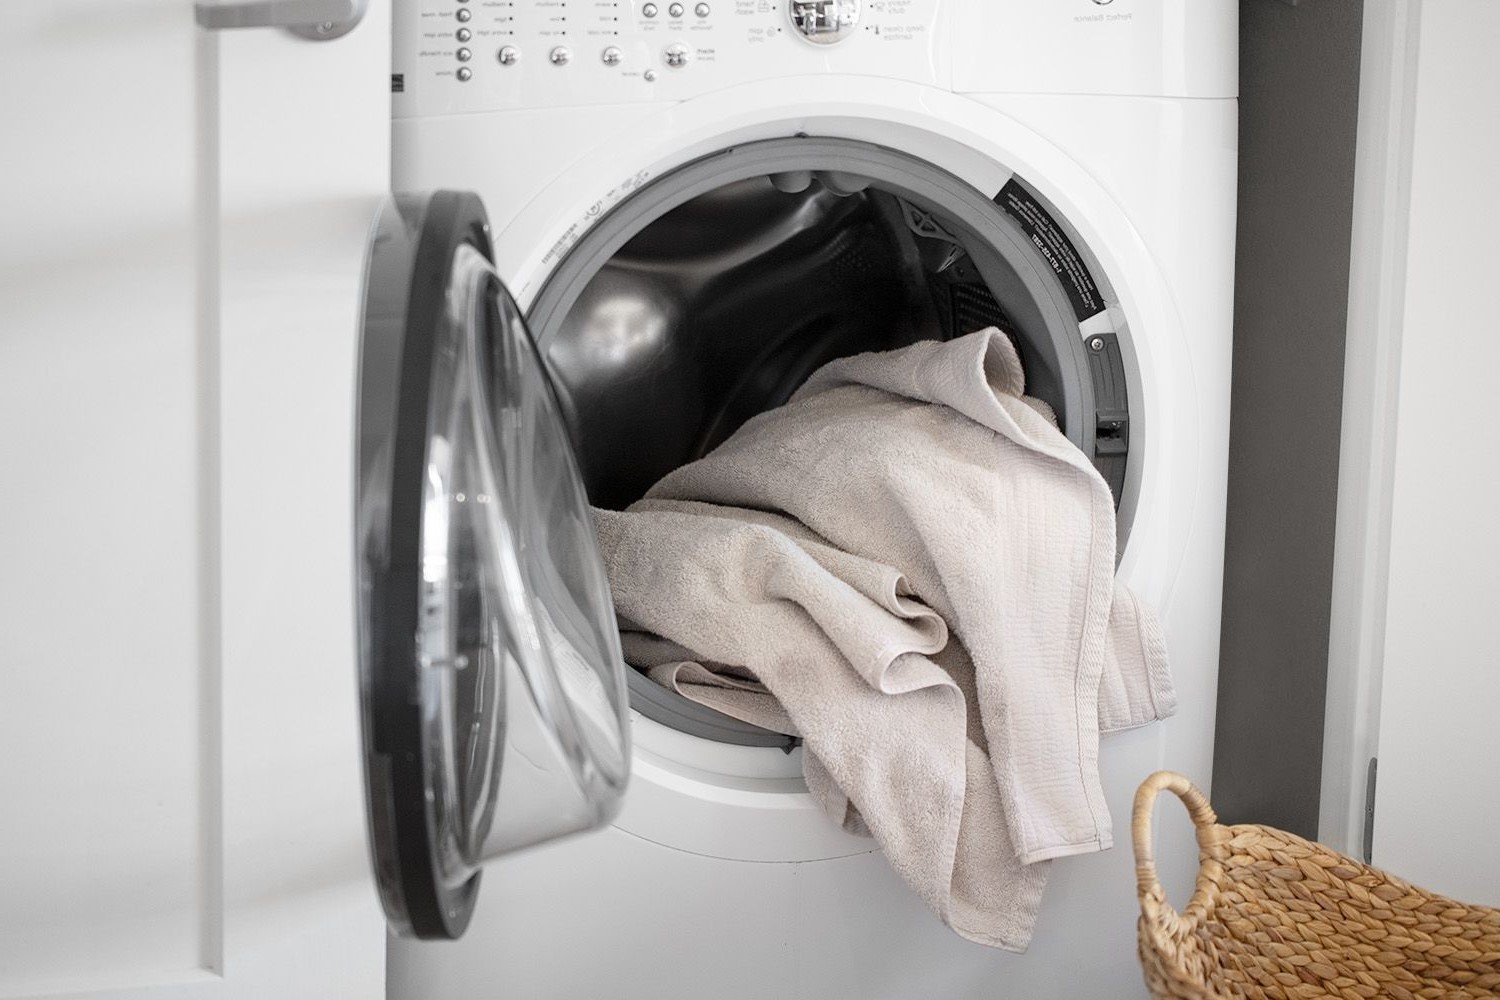 How To Operate A Washing Machine